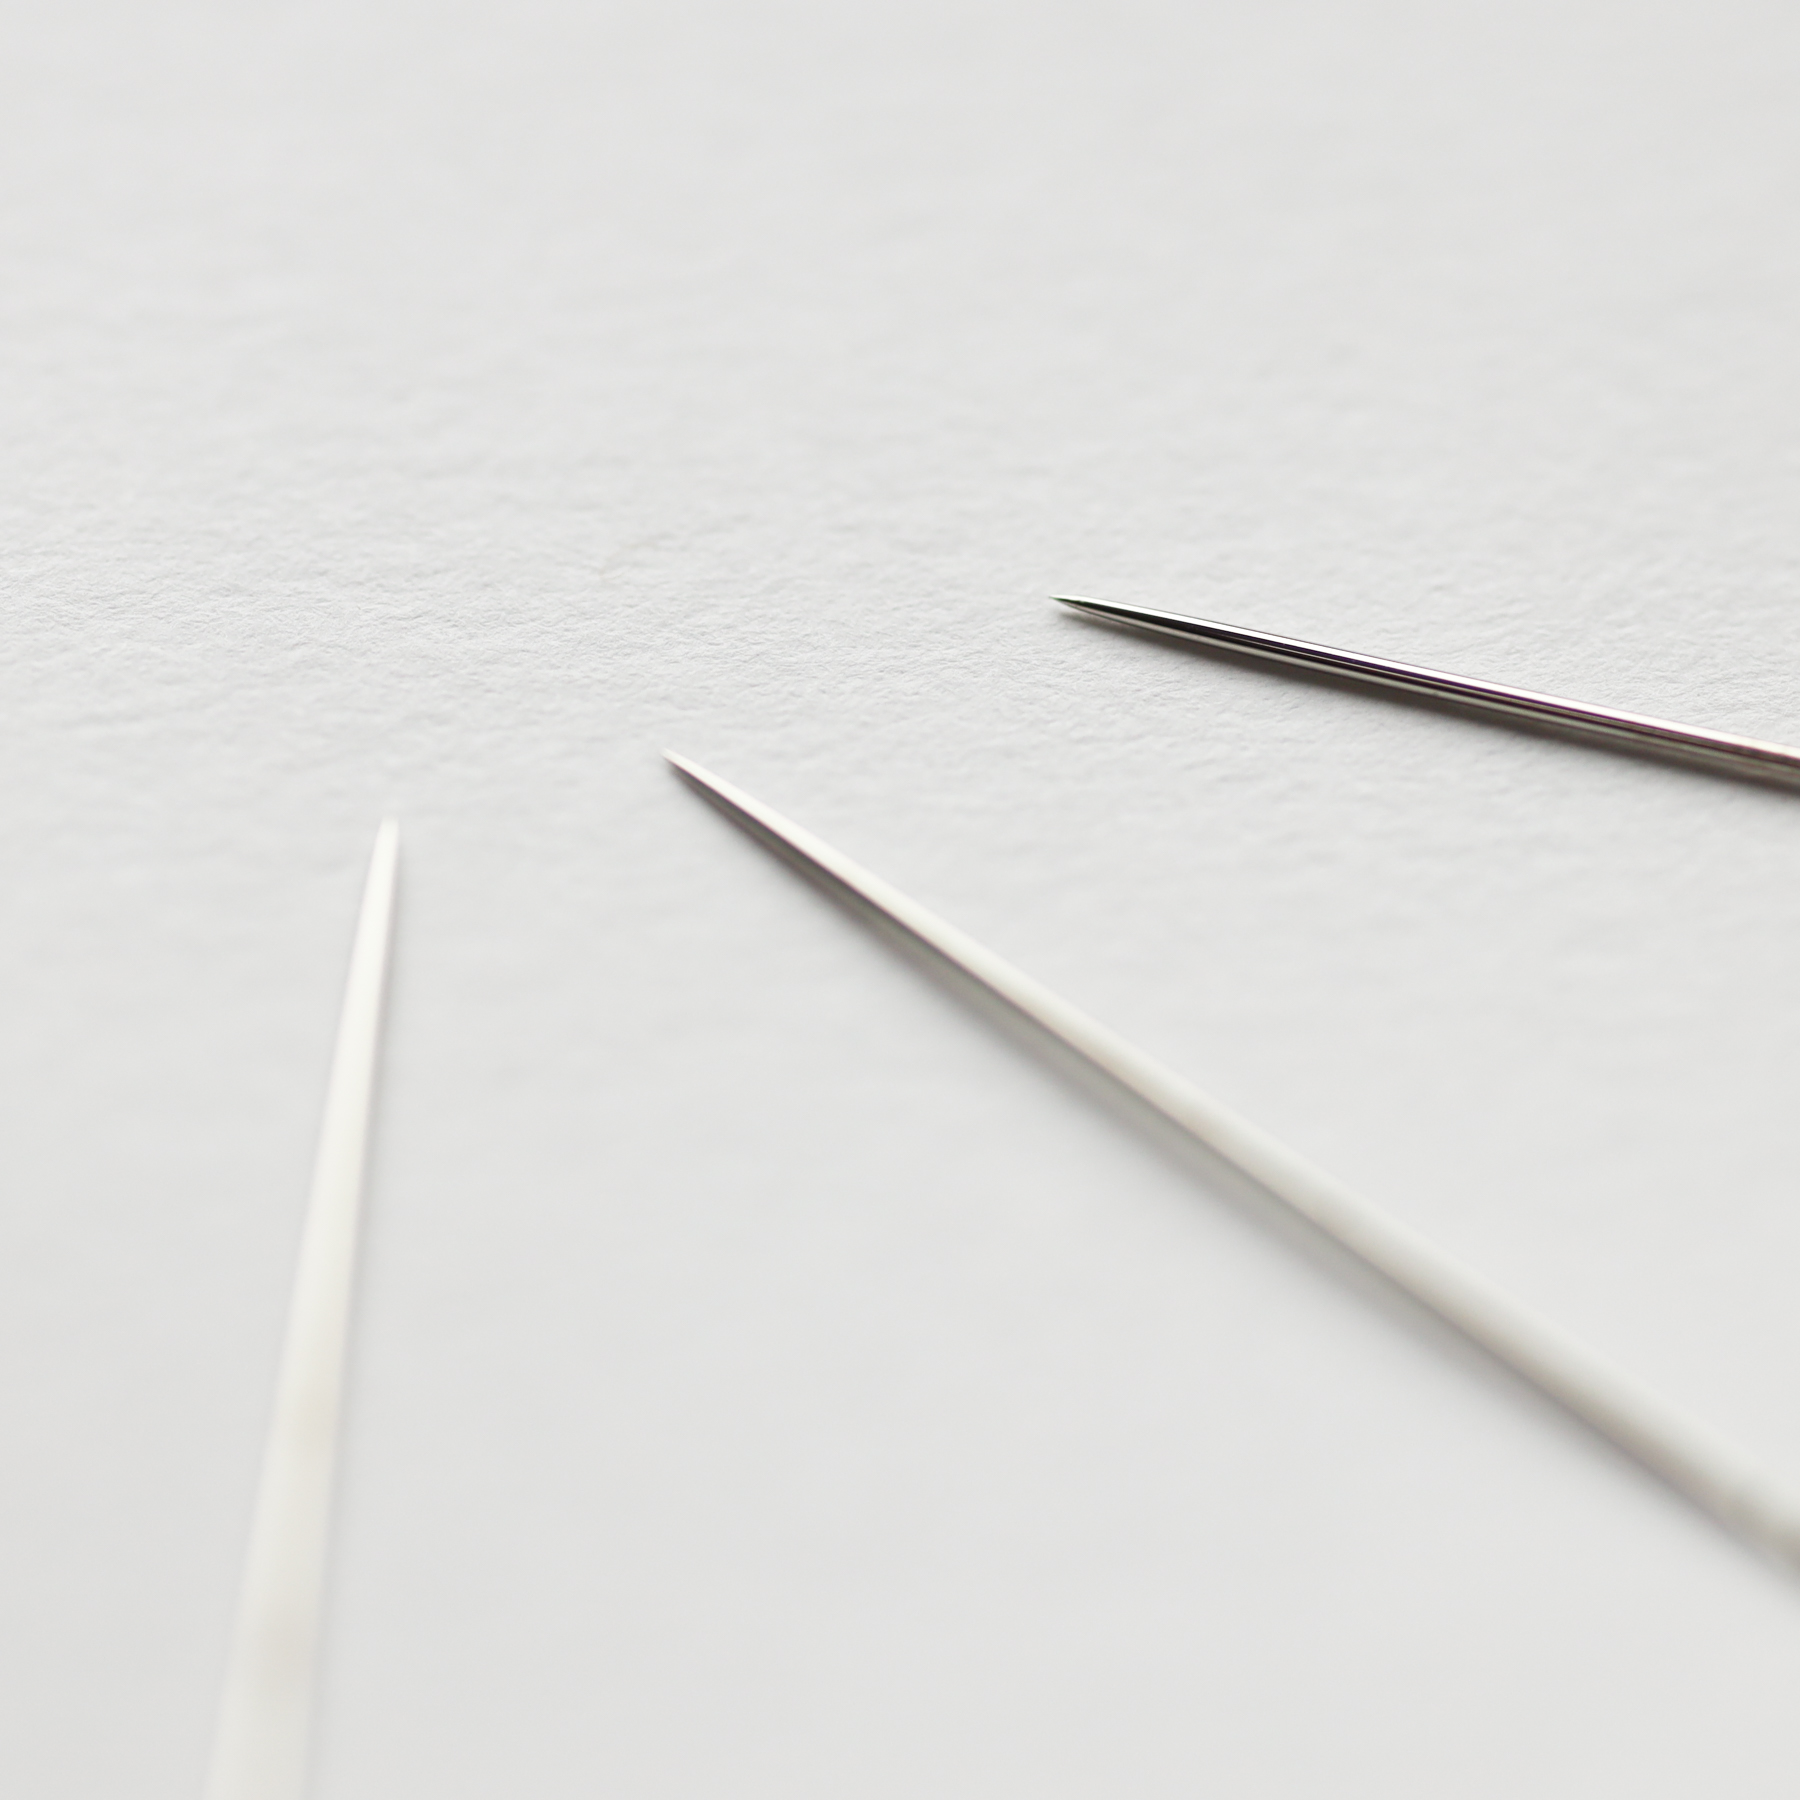 Sewing Needles #7